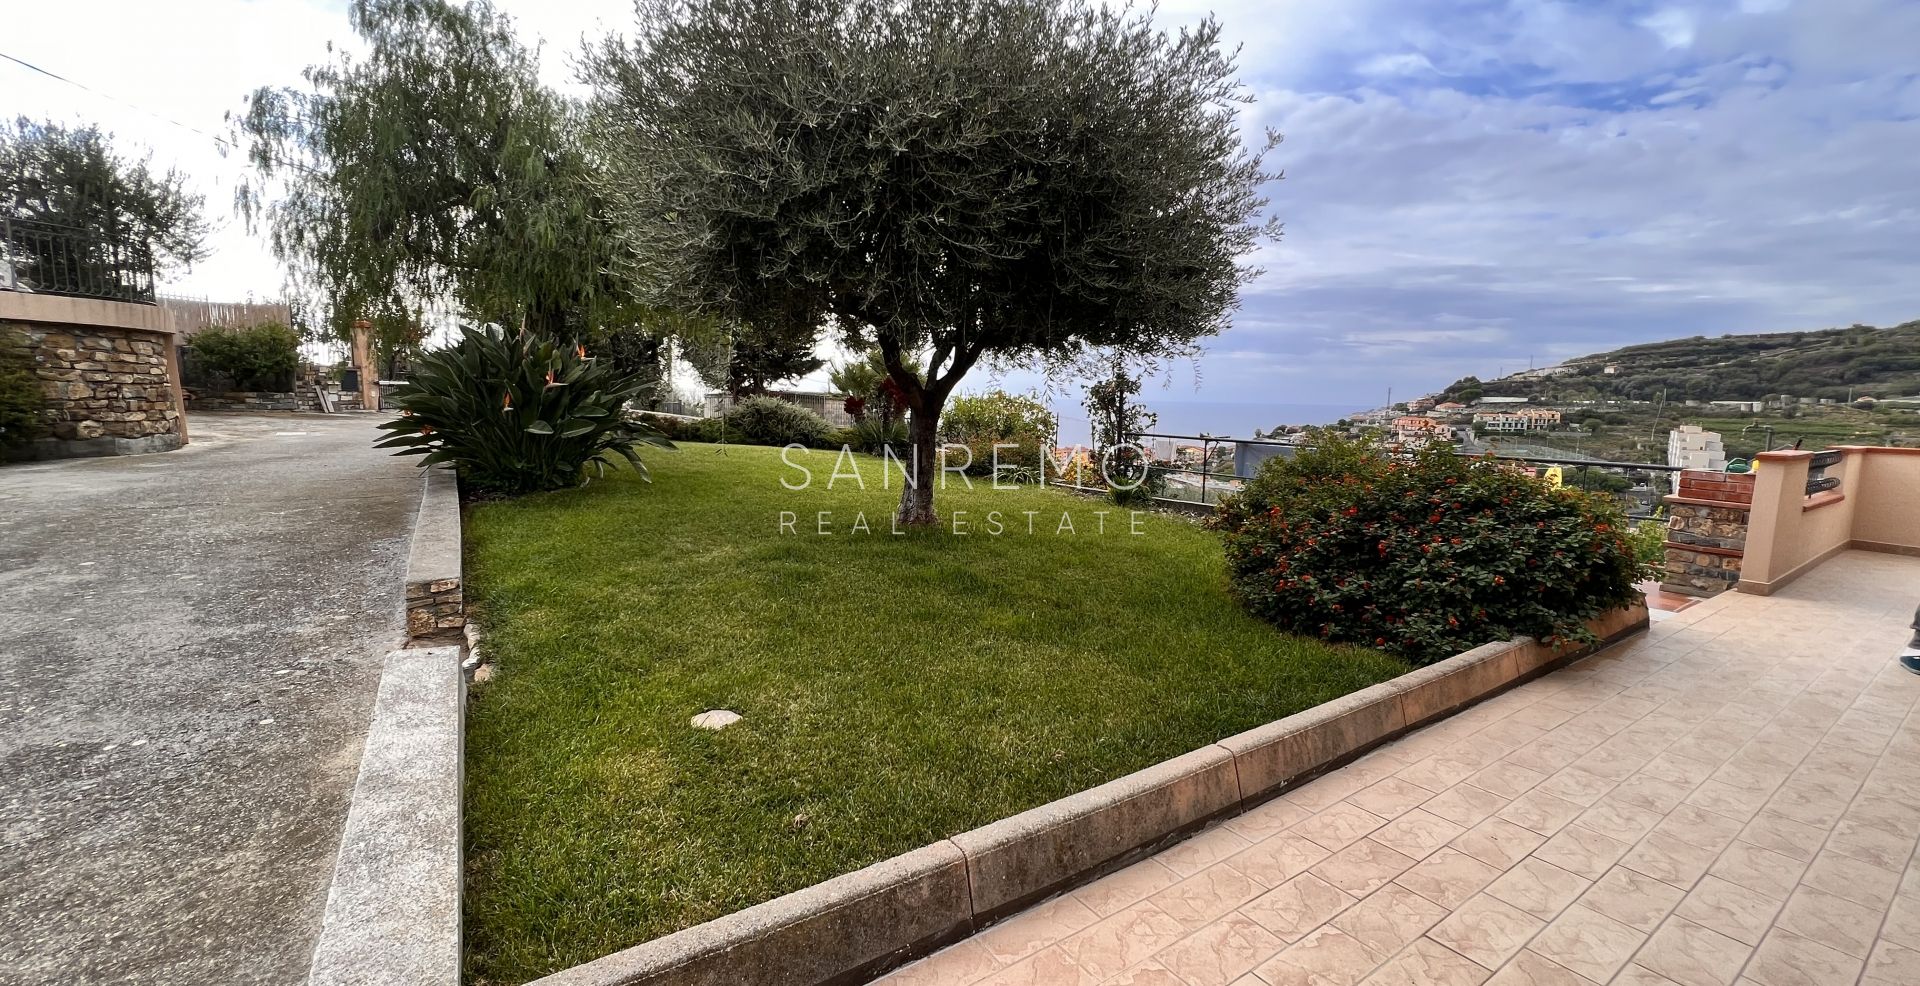 Bright villa in excellent condition on three levels with surrounding garden